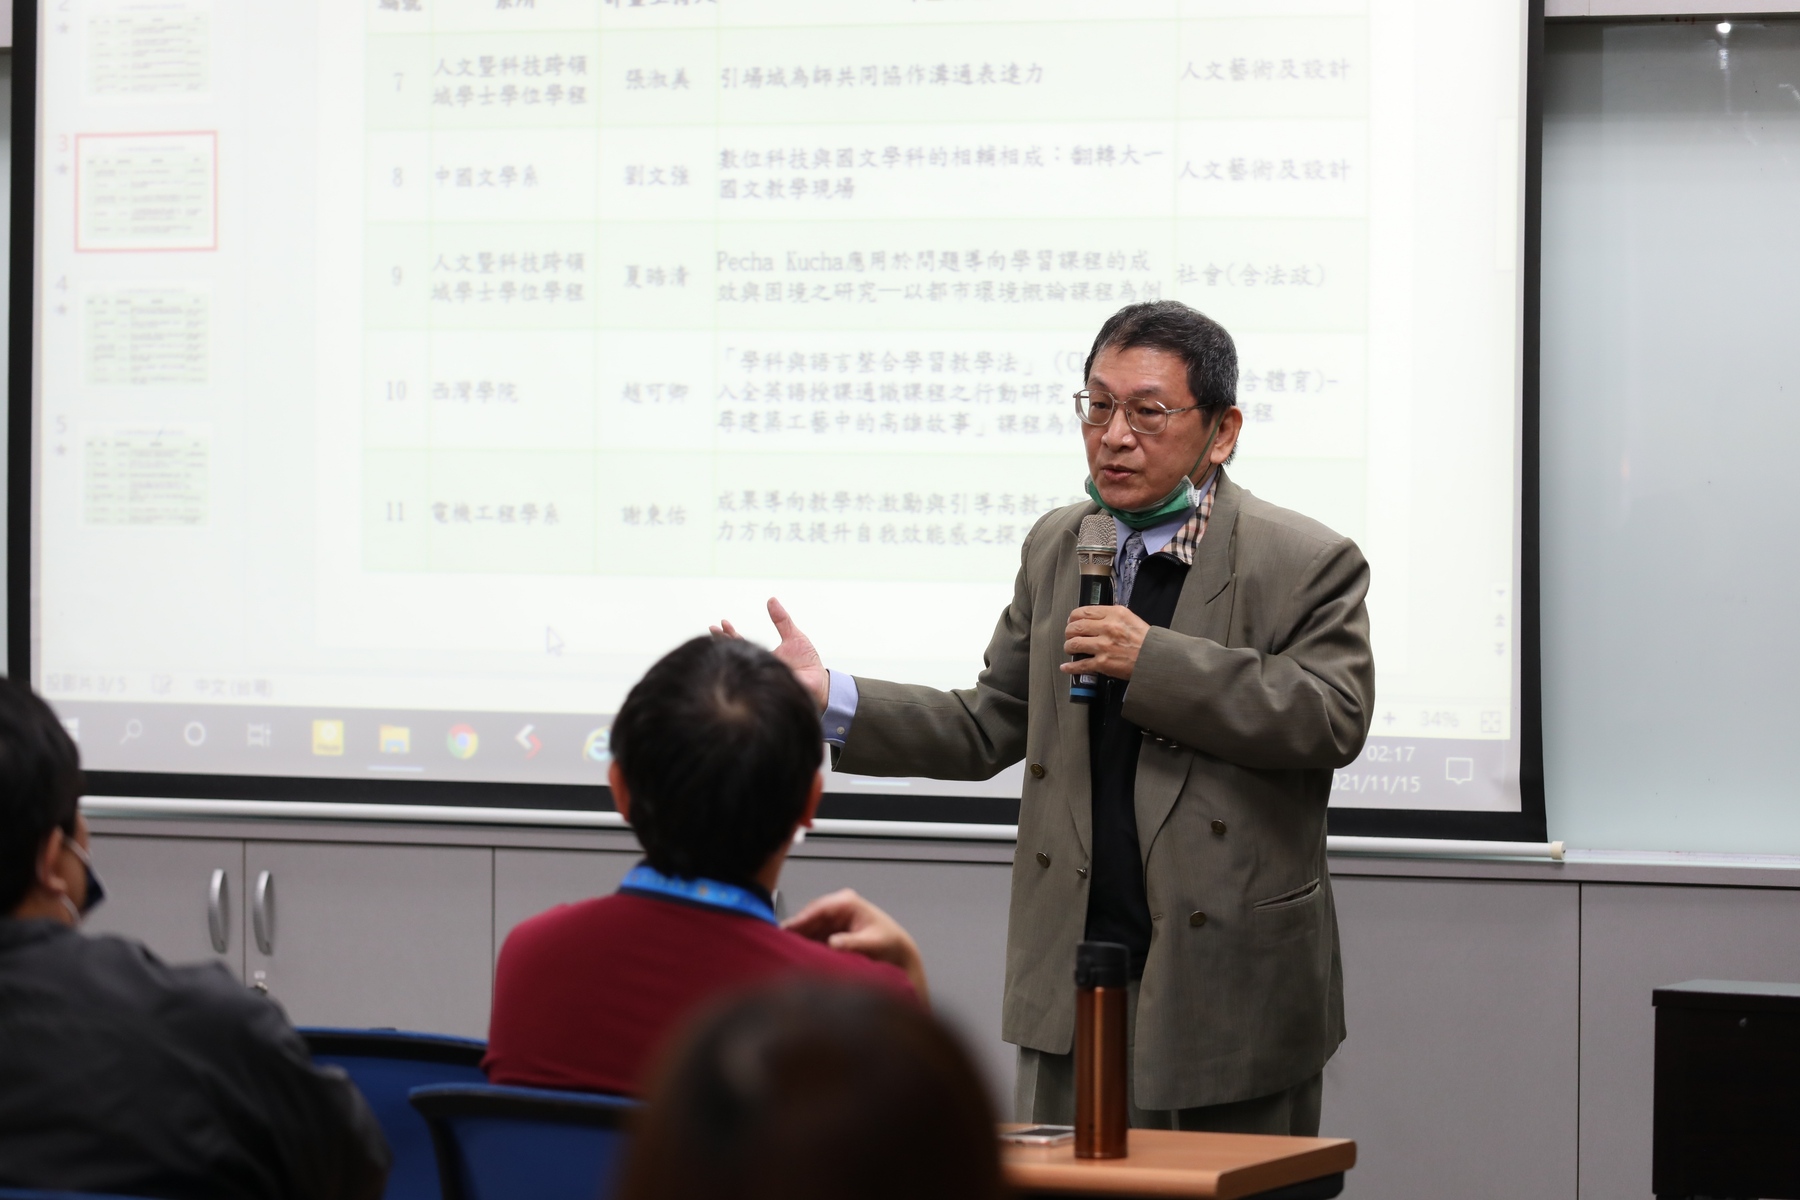 Professor Wen-Chiang Liu of the Department of Chinese Literature